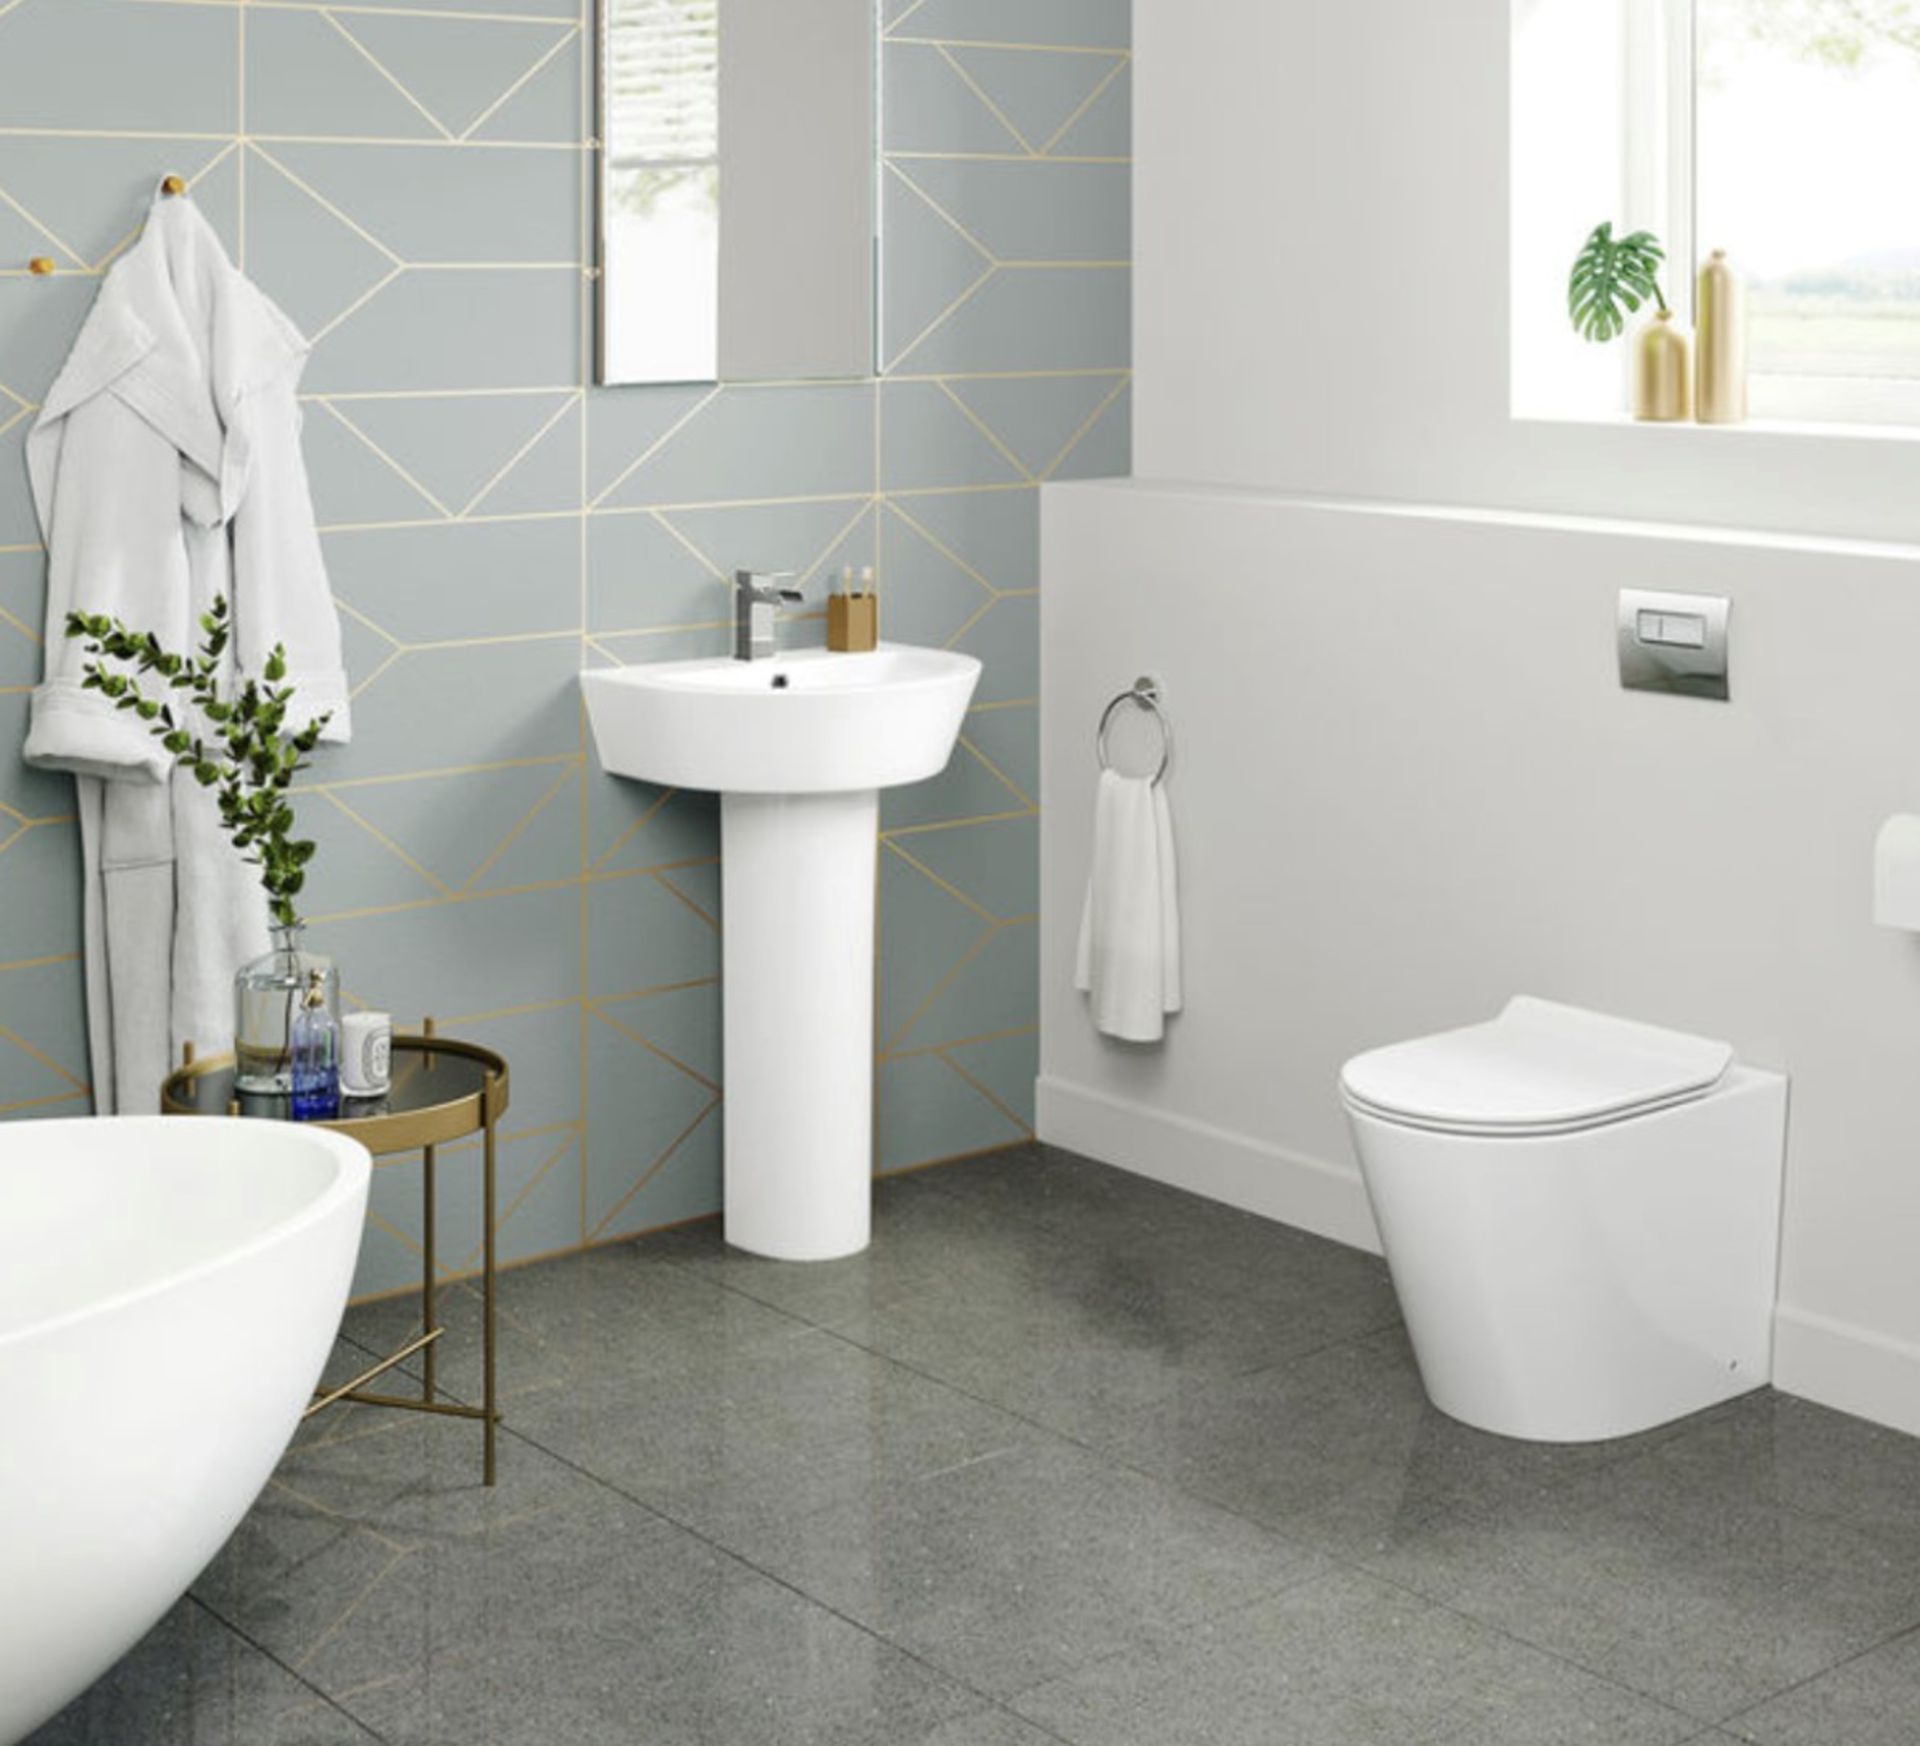 NEW & BOXED Lyon Back To Wall Toilet with Slim Soft Close Seat. RRP £349.99 each. Our Lyon ba... - Image 2 of 2